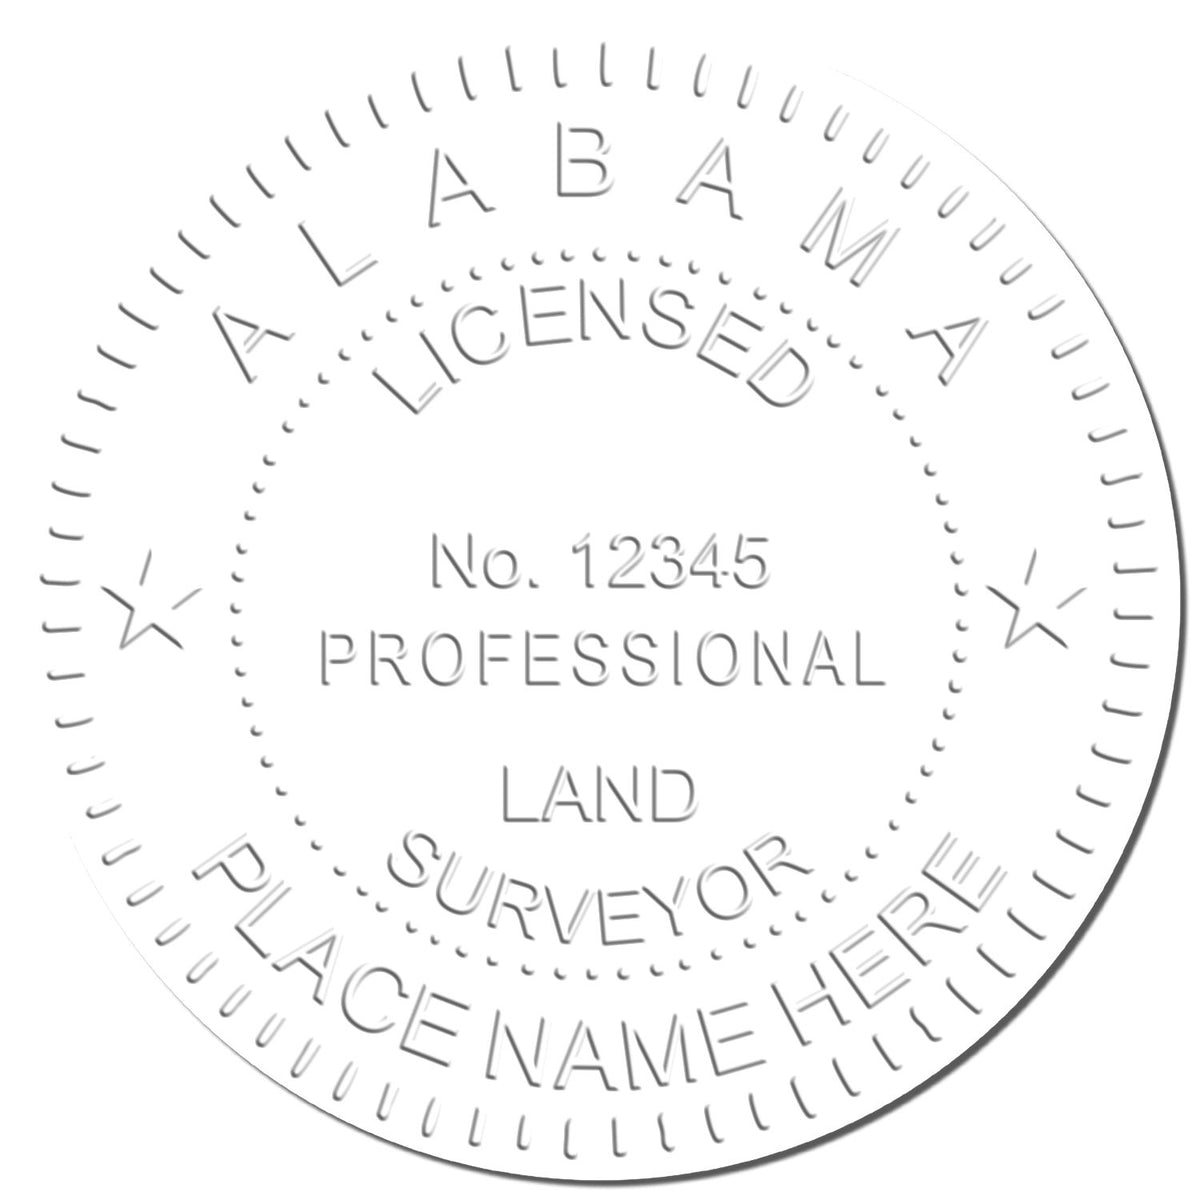 This paper is stamped with a sample imprint of the Handheld Alabama Land Surveyor Seal, signifying its quality and reliability.